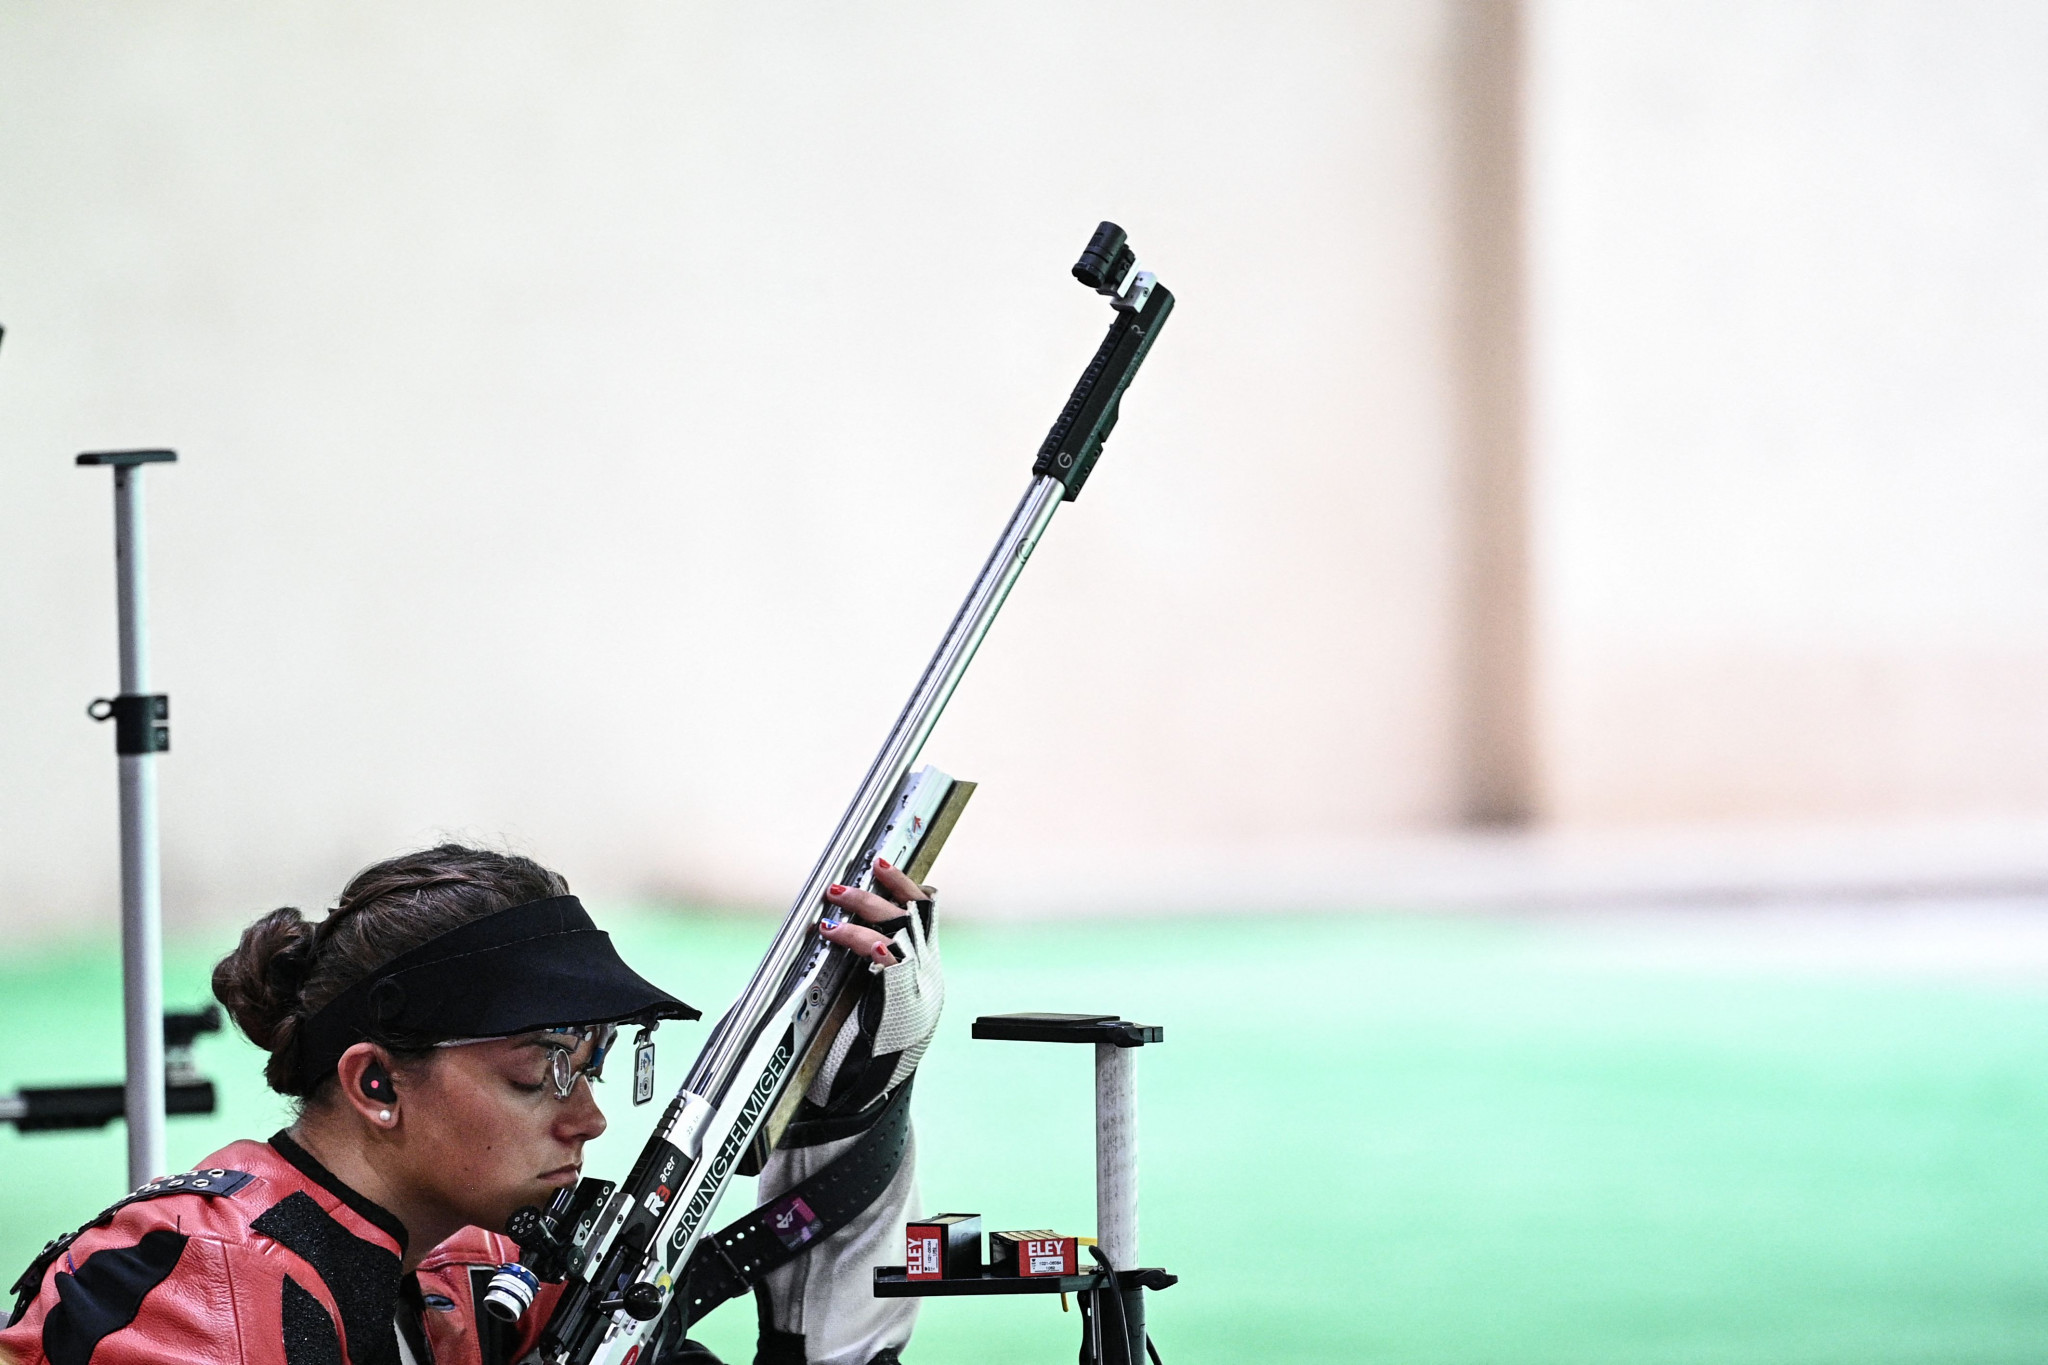 Duestad clinches three positions rifle win at ISSF World Cup in Cairo